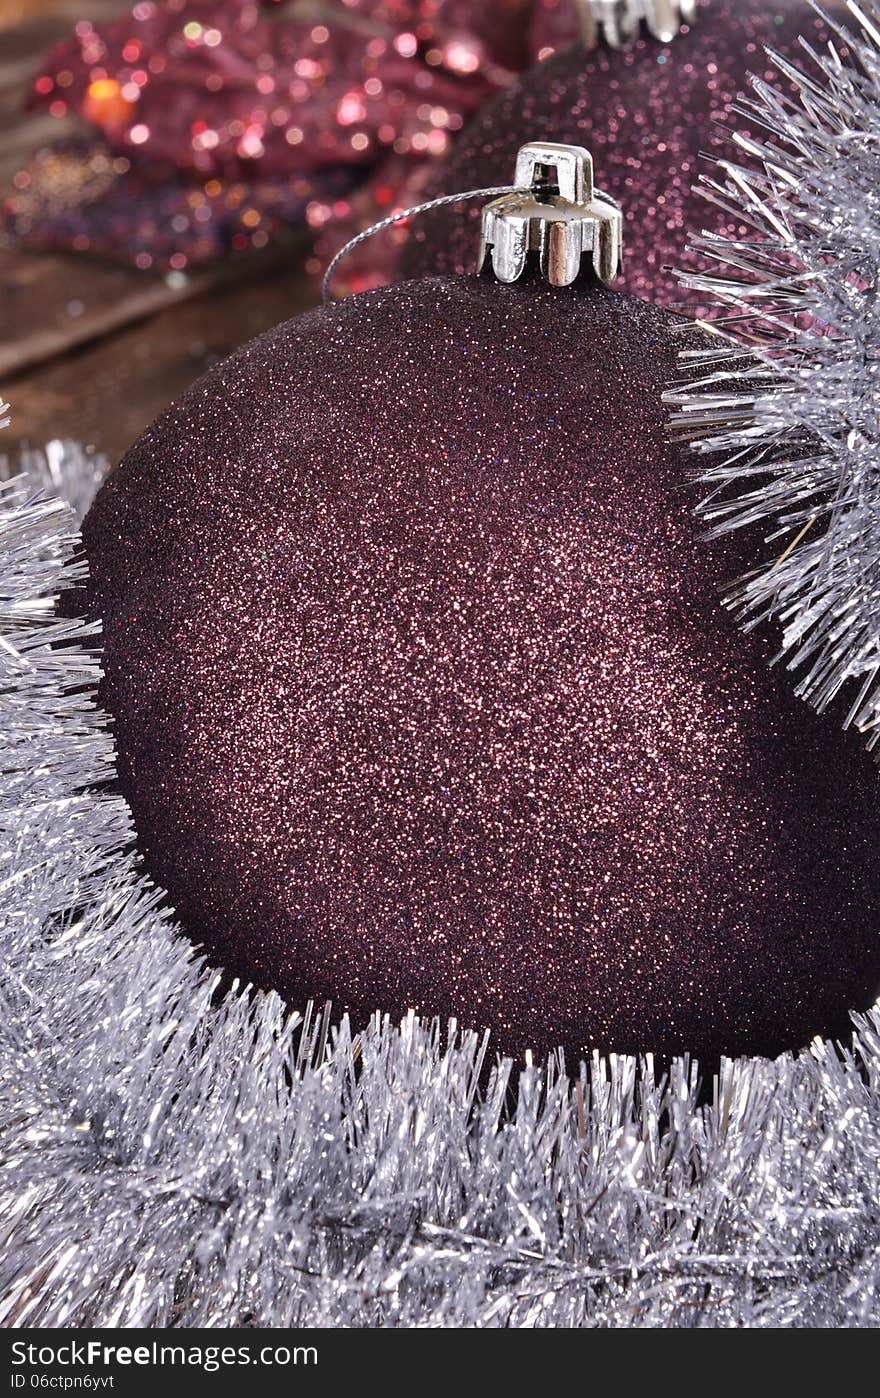 Christmas balls and tinsel on wooden background. Christmas balls and tinsel on wooden background